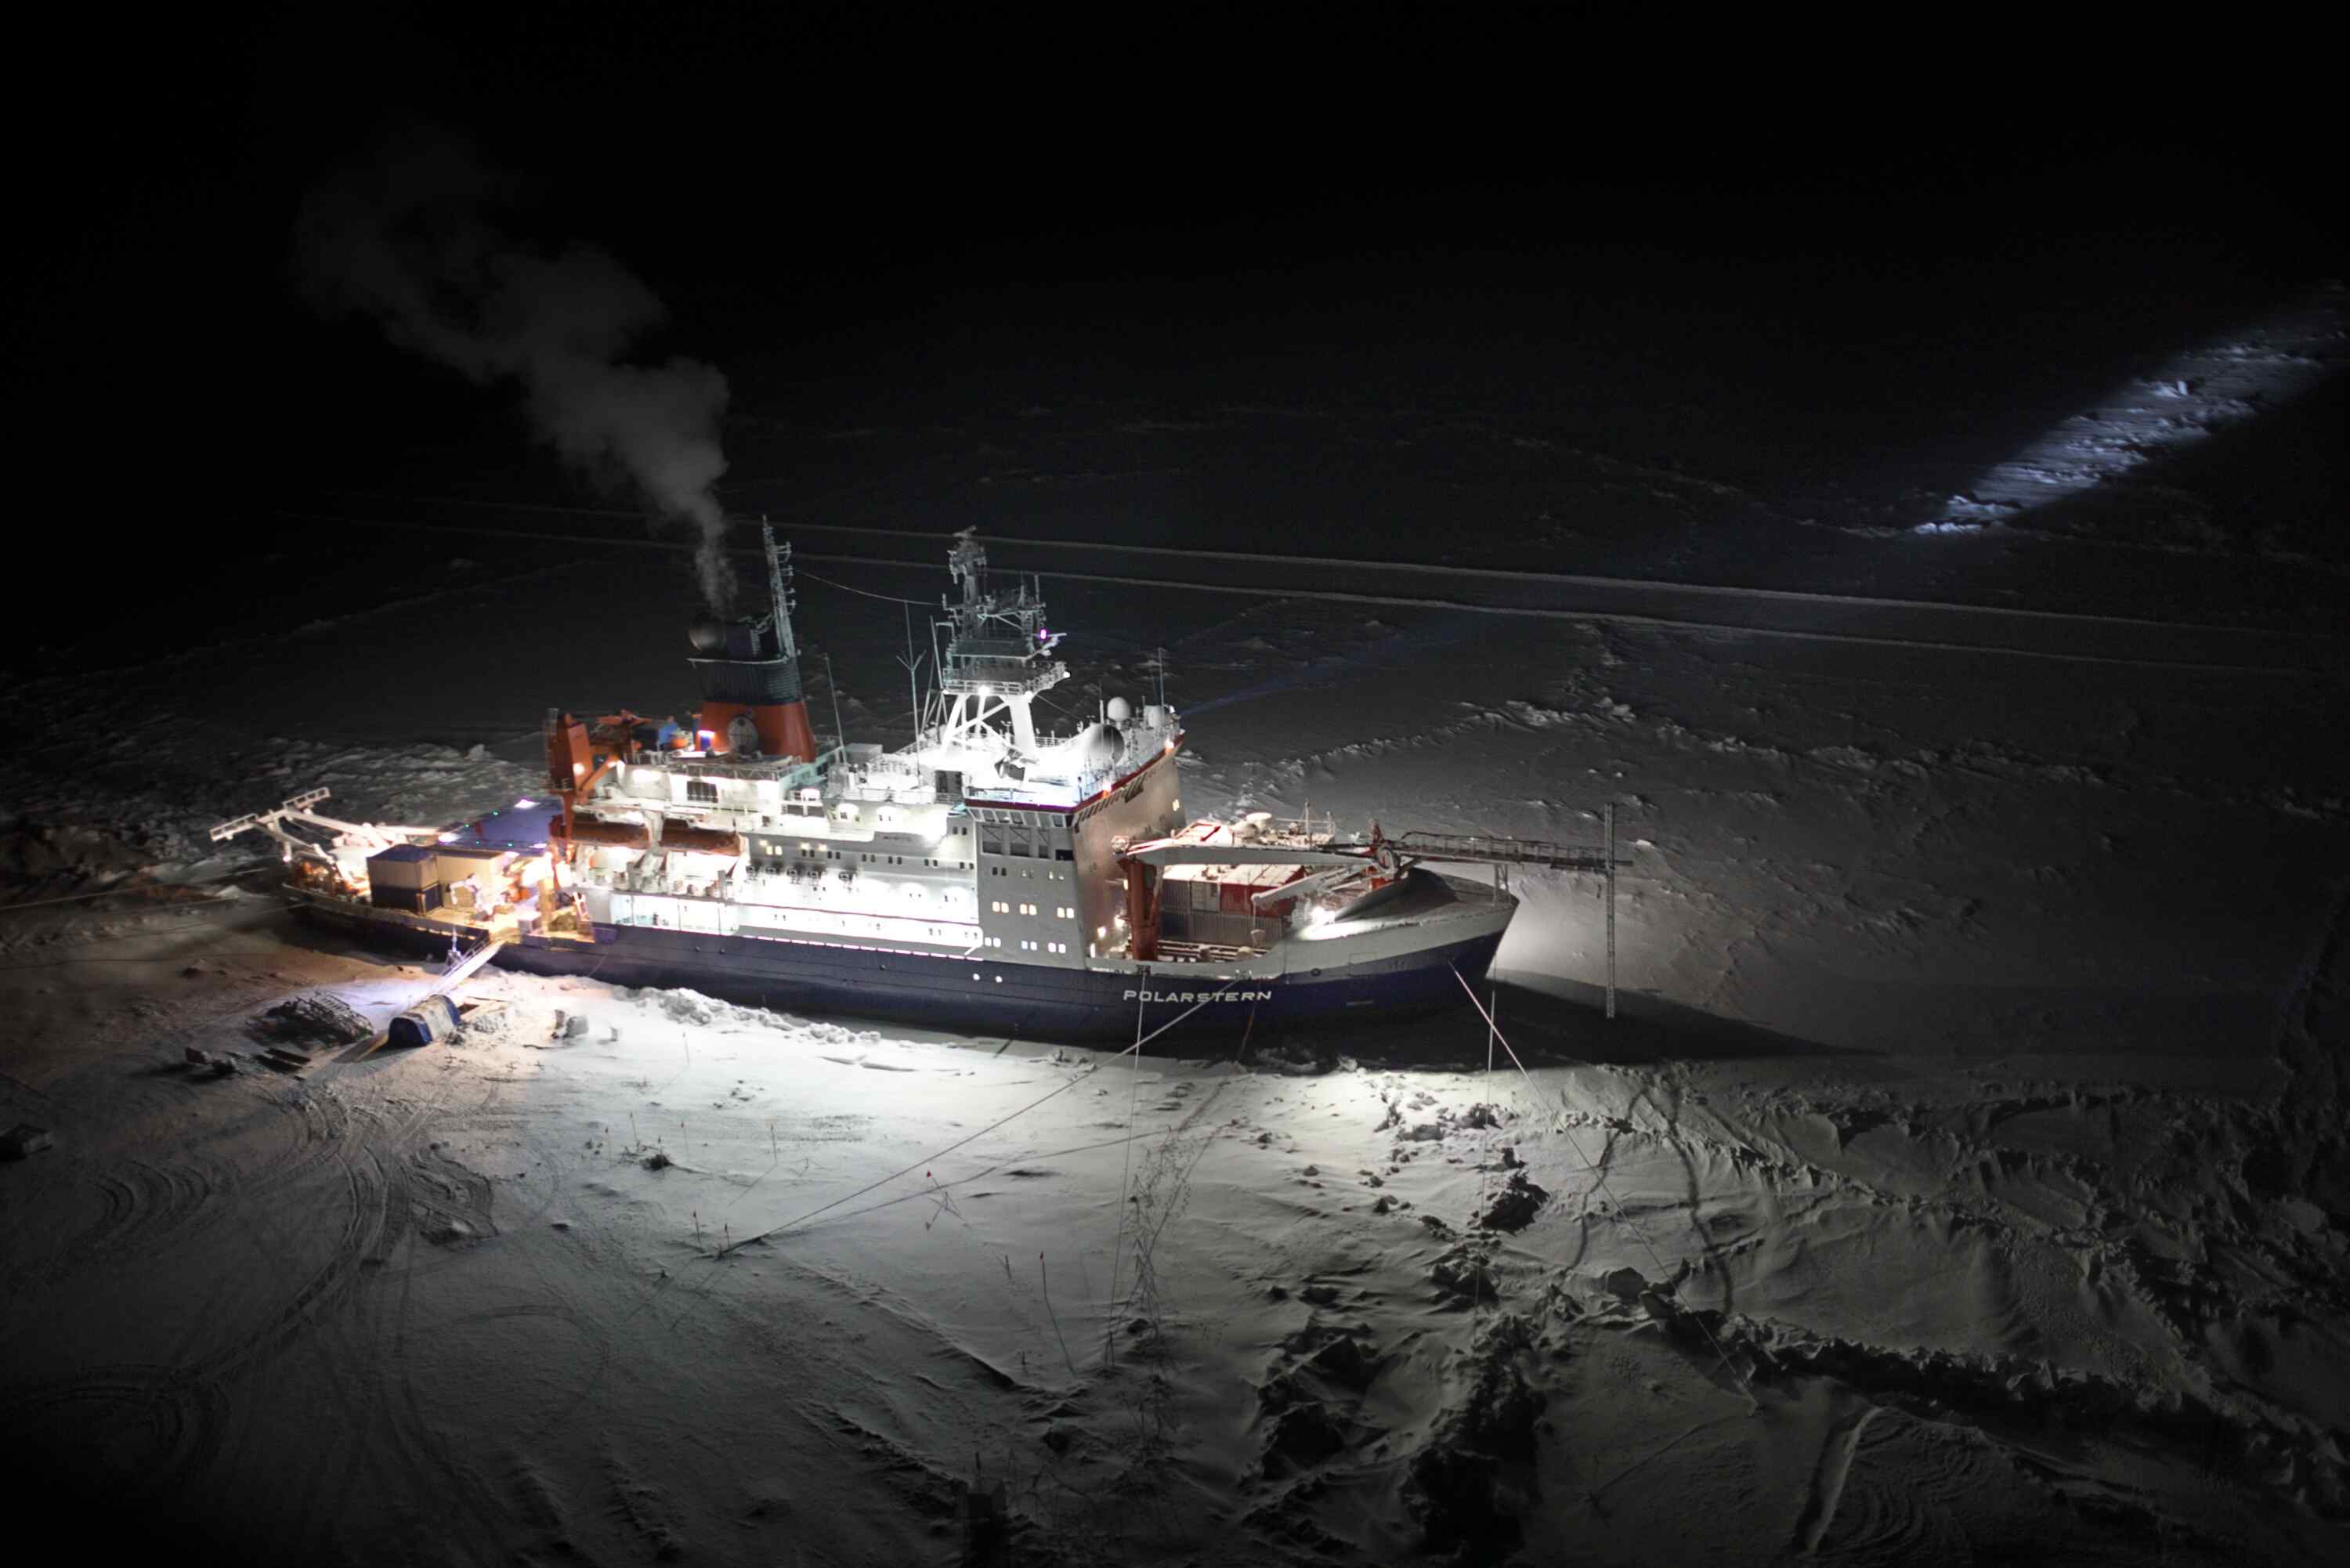 Polarstern in the Ice - M. Gallagher